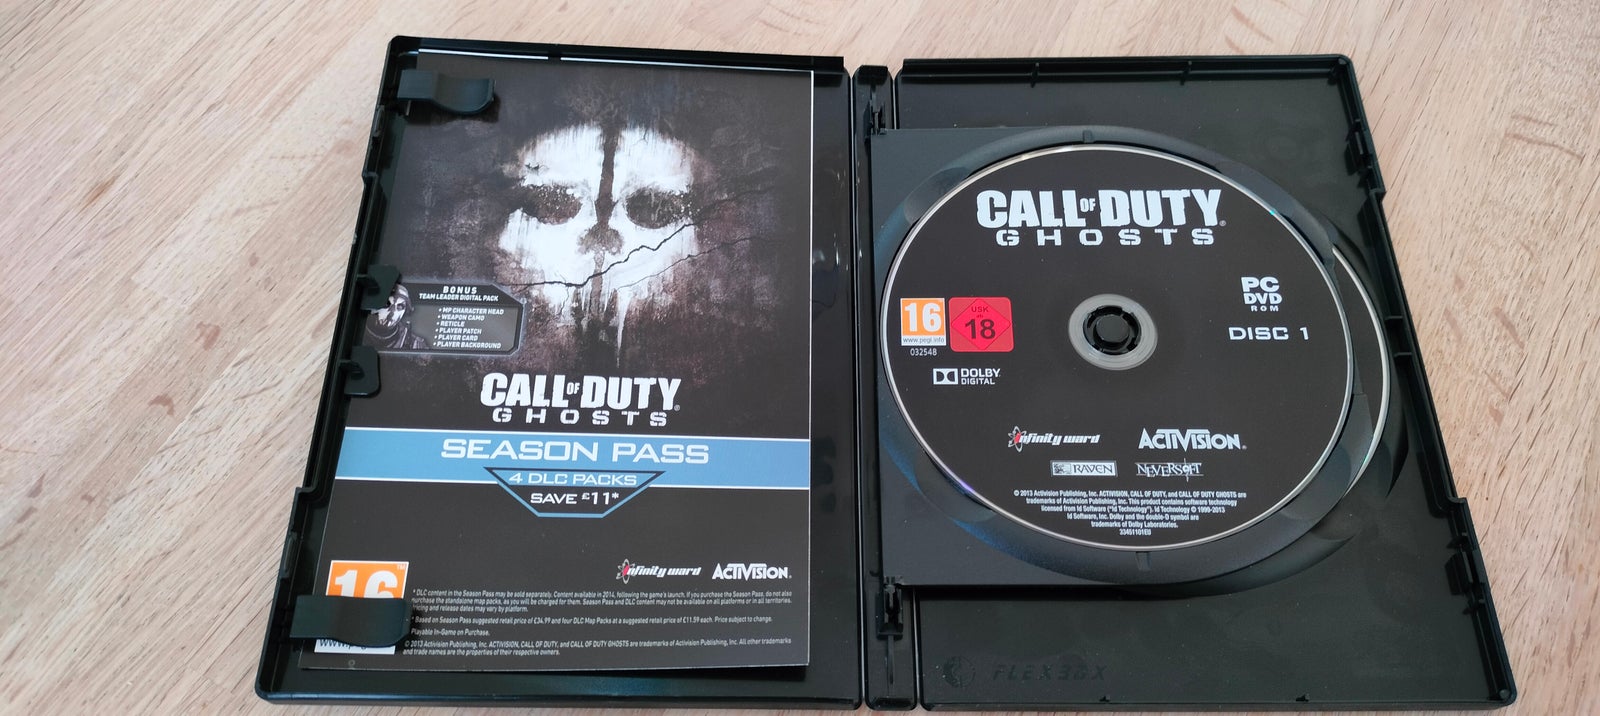 CALL OF DUTY – GHOSTS (Box-set med 4 Discs), til pc, First